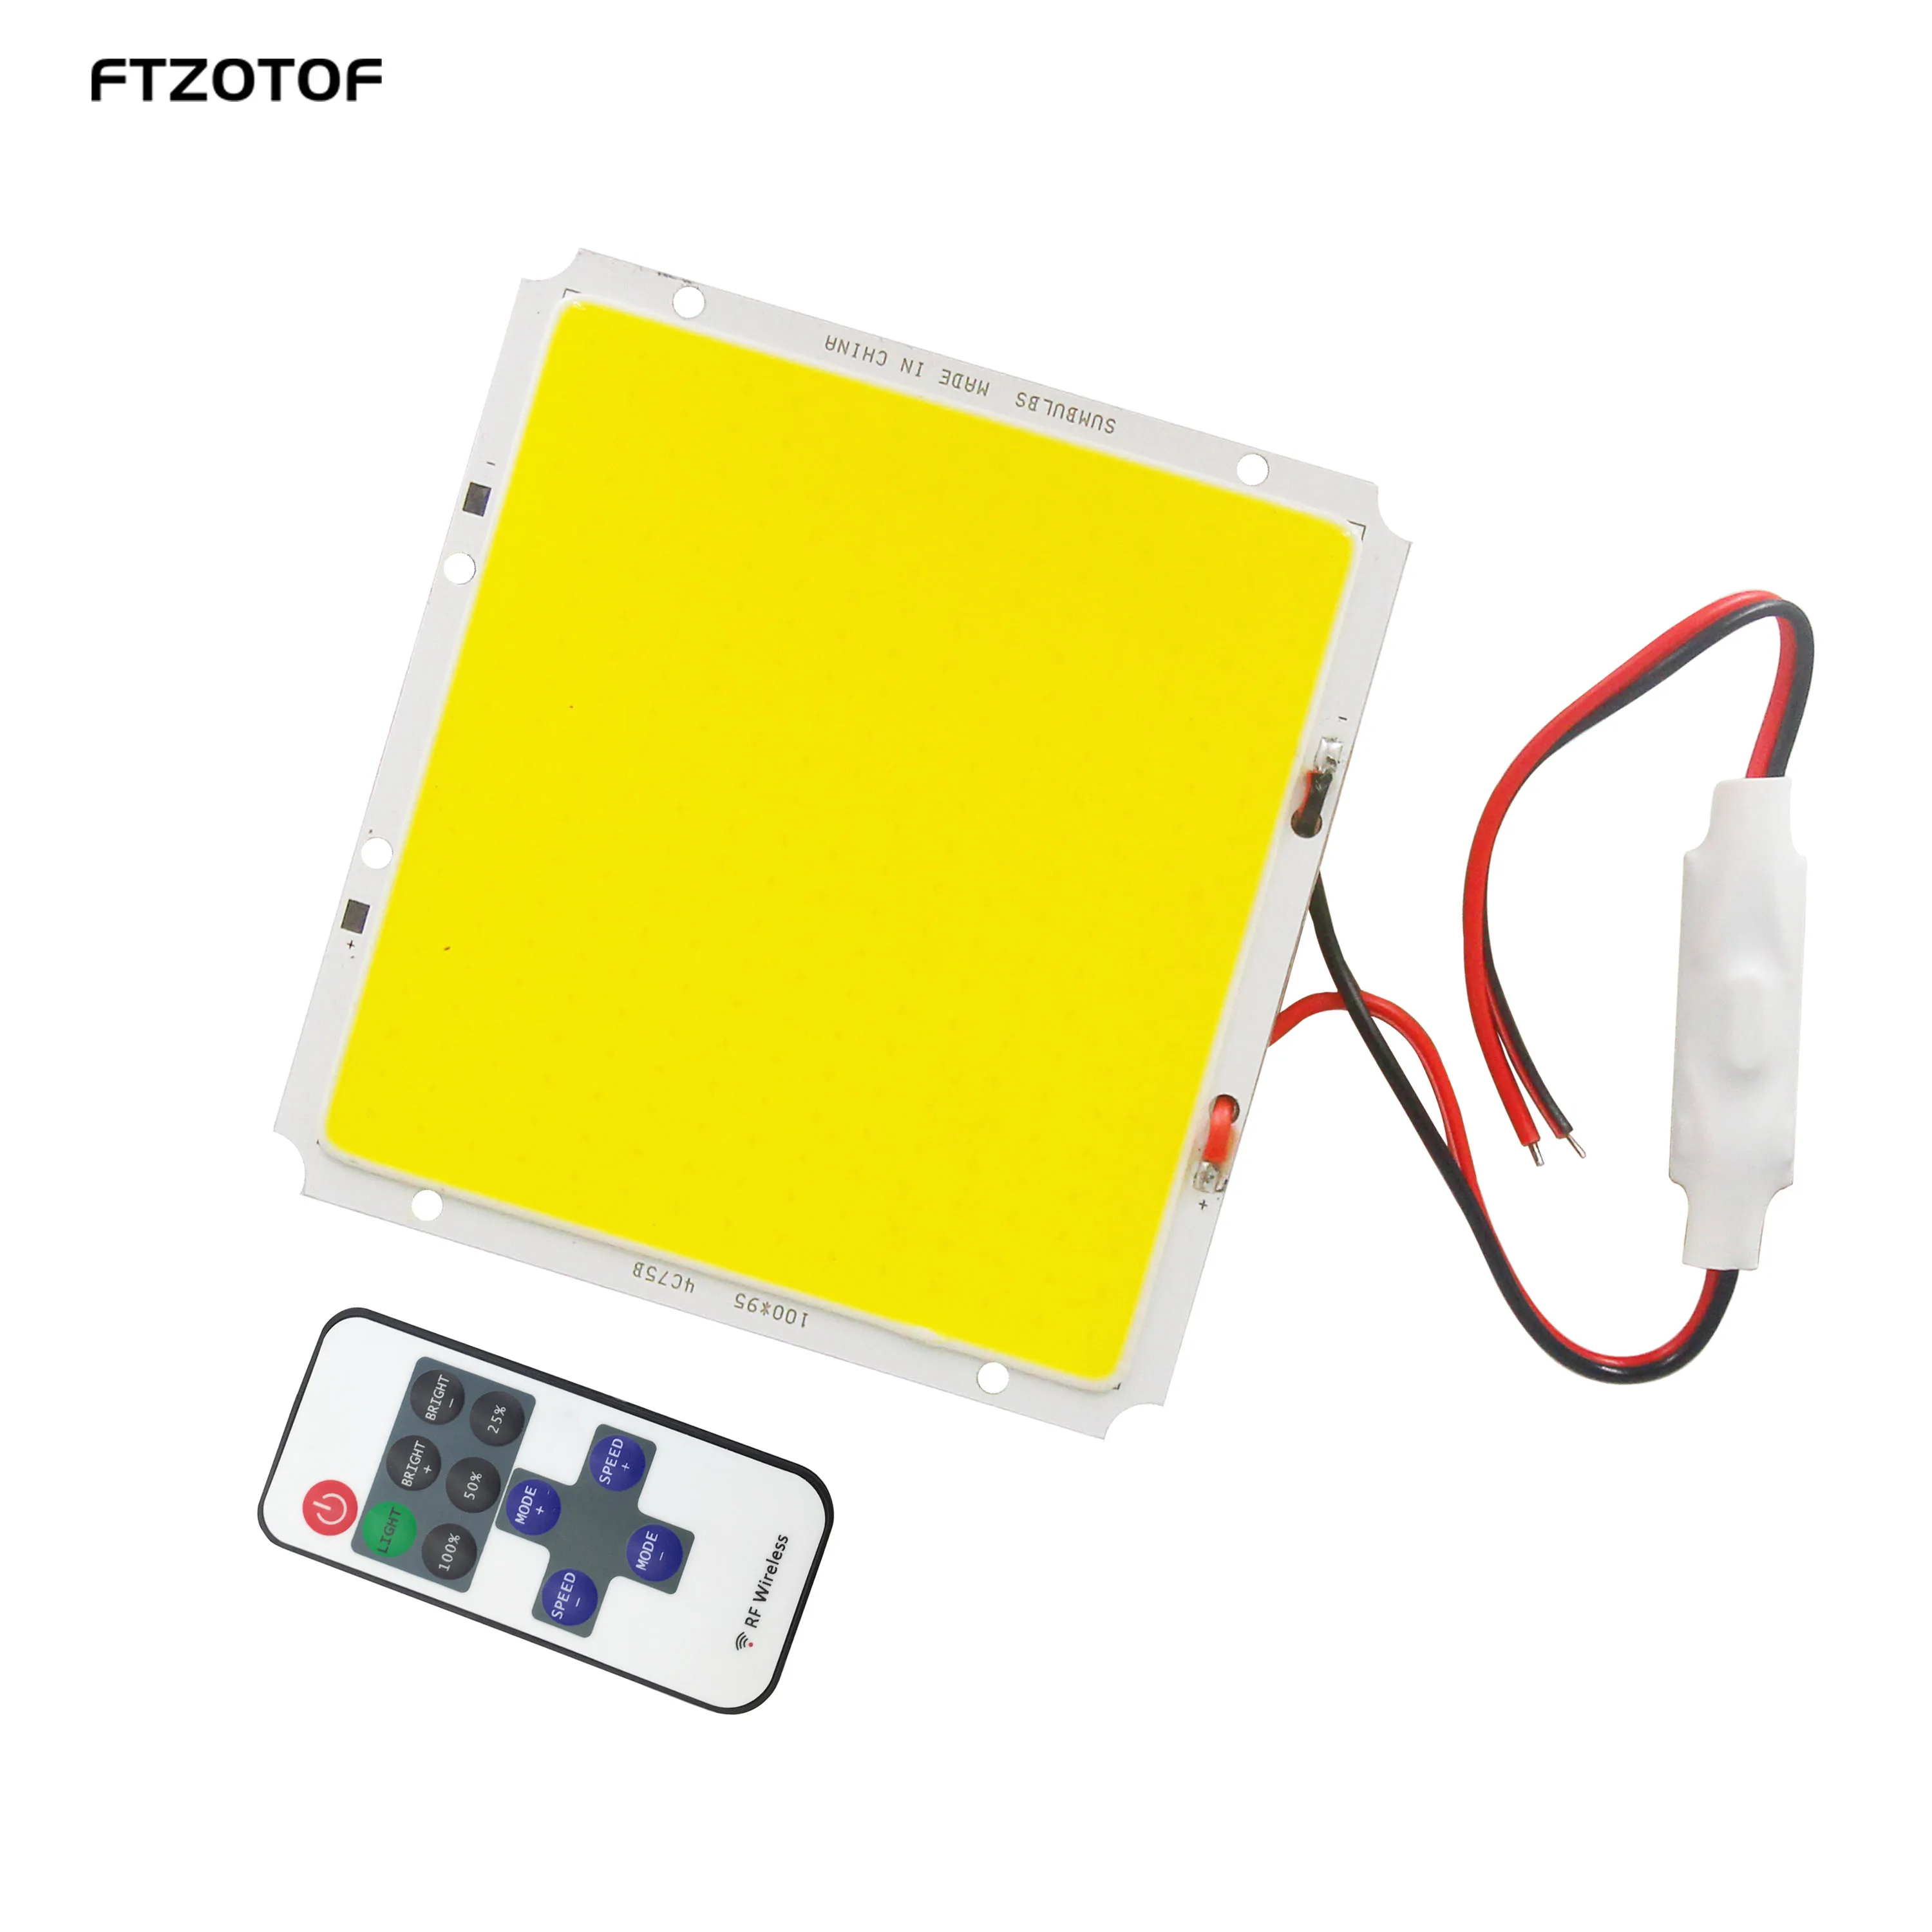 FTZOTOF 12V LED Chip COB 50W Light Source Bulb 100*95mm Round 108mm With Dimmable Cold Warm White Panel DIY Garden Outdoor Lamps